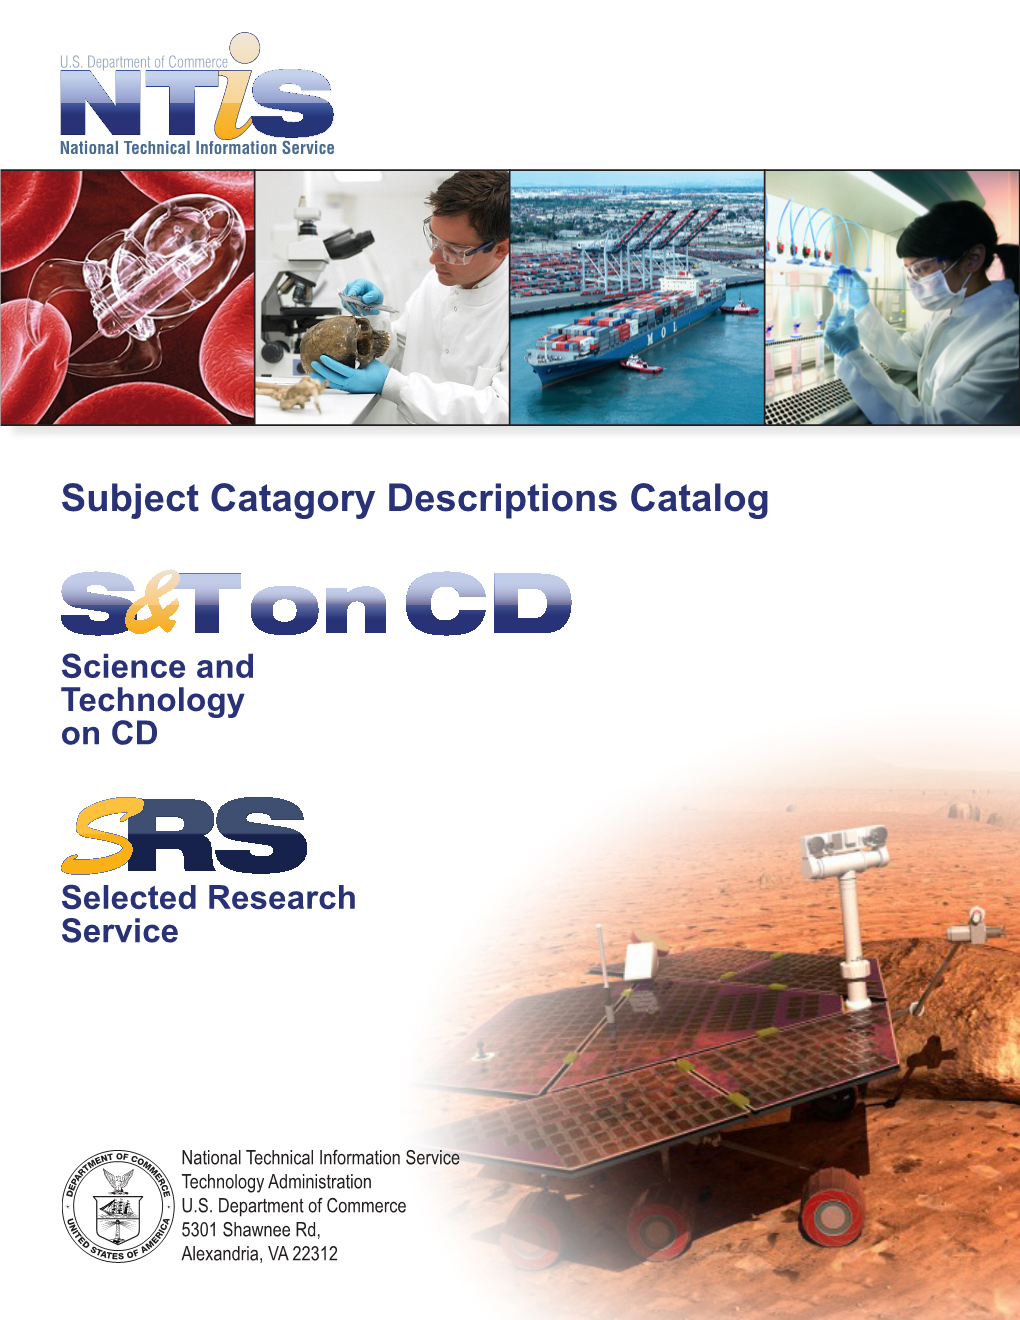 Science and Technology on CD Subject Catagory Descriptions